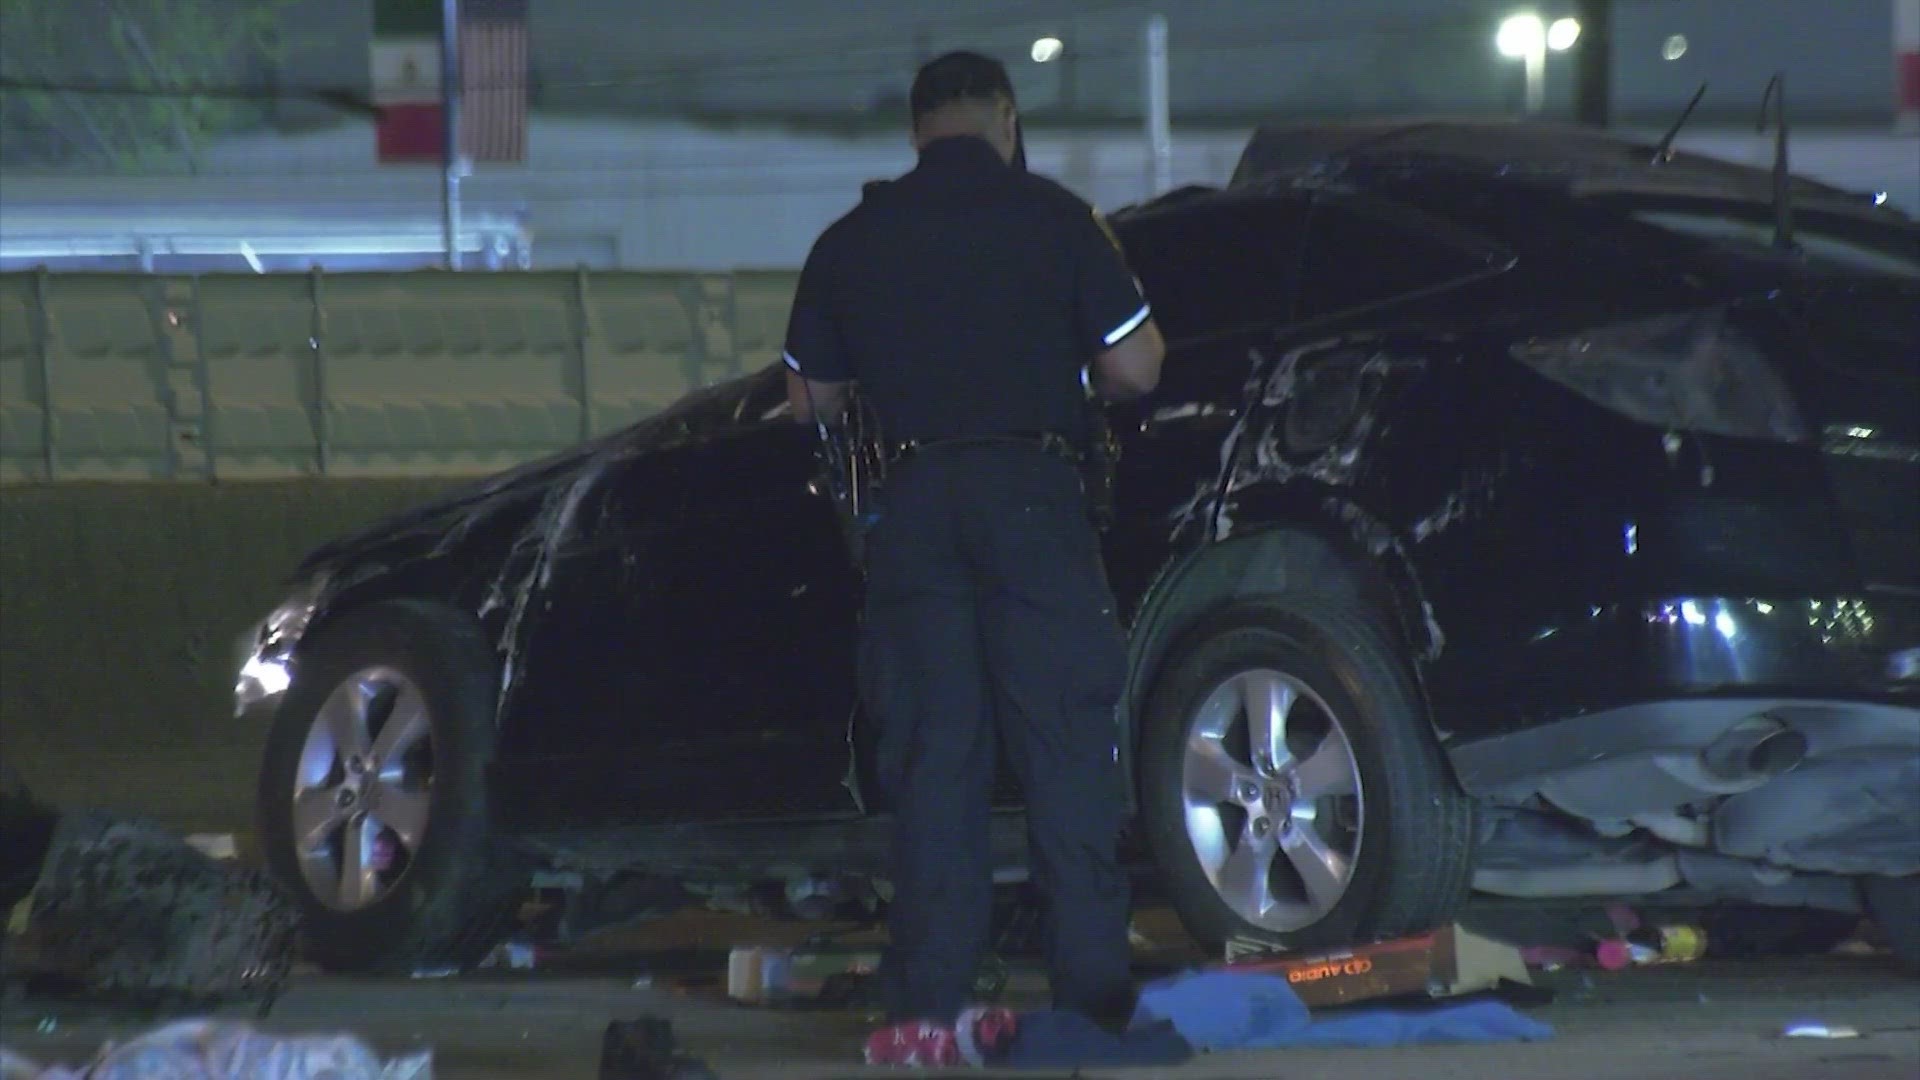 An infant was killed and several people were injured in a crash on the North Freeway late Sunday night, according to the Houston Police Department.